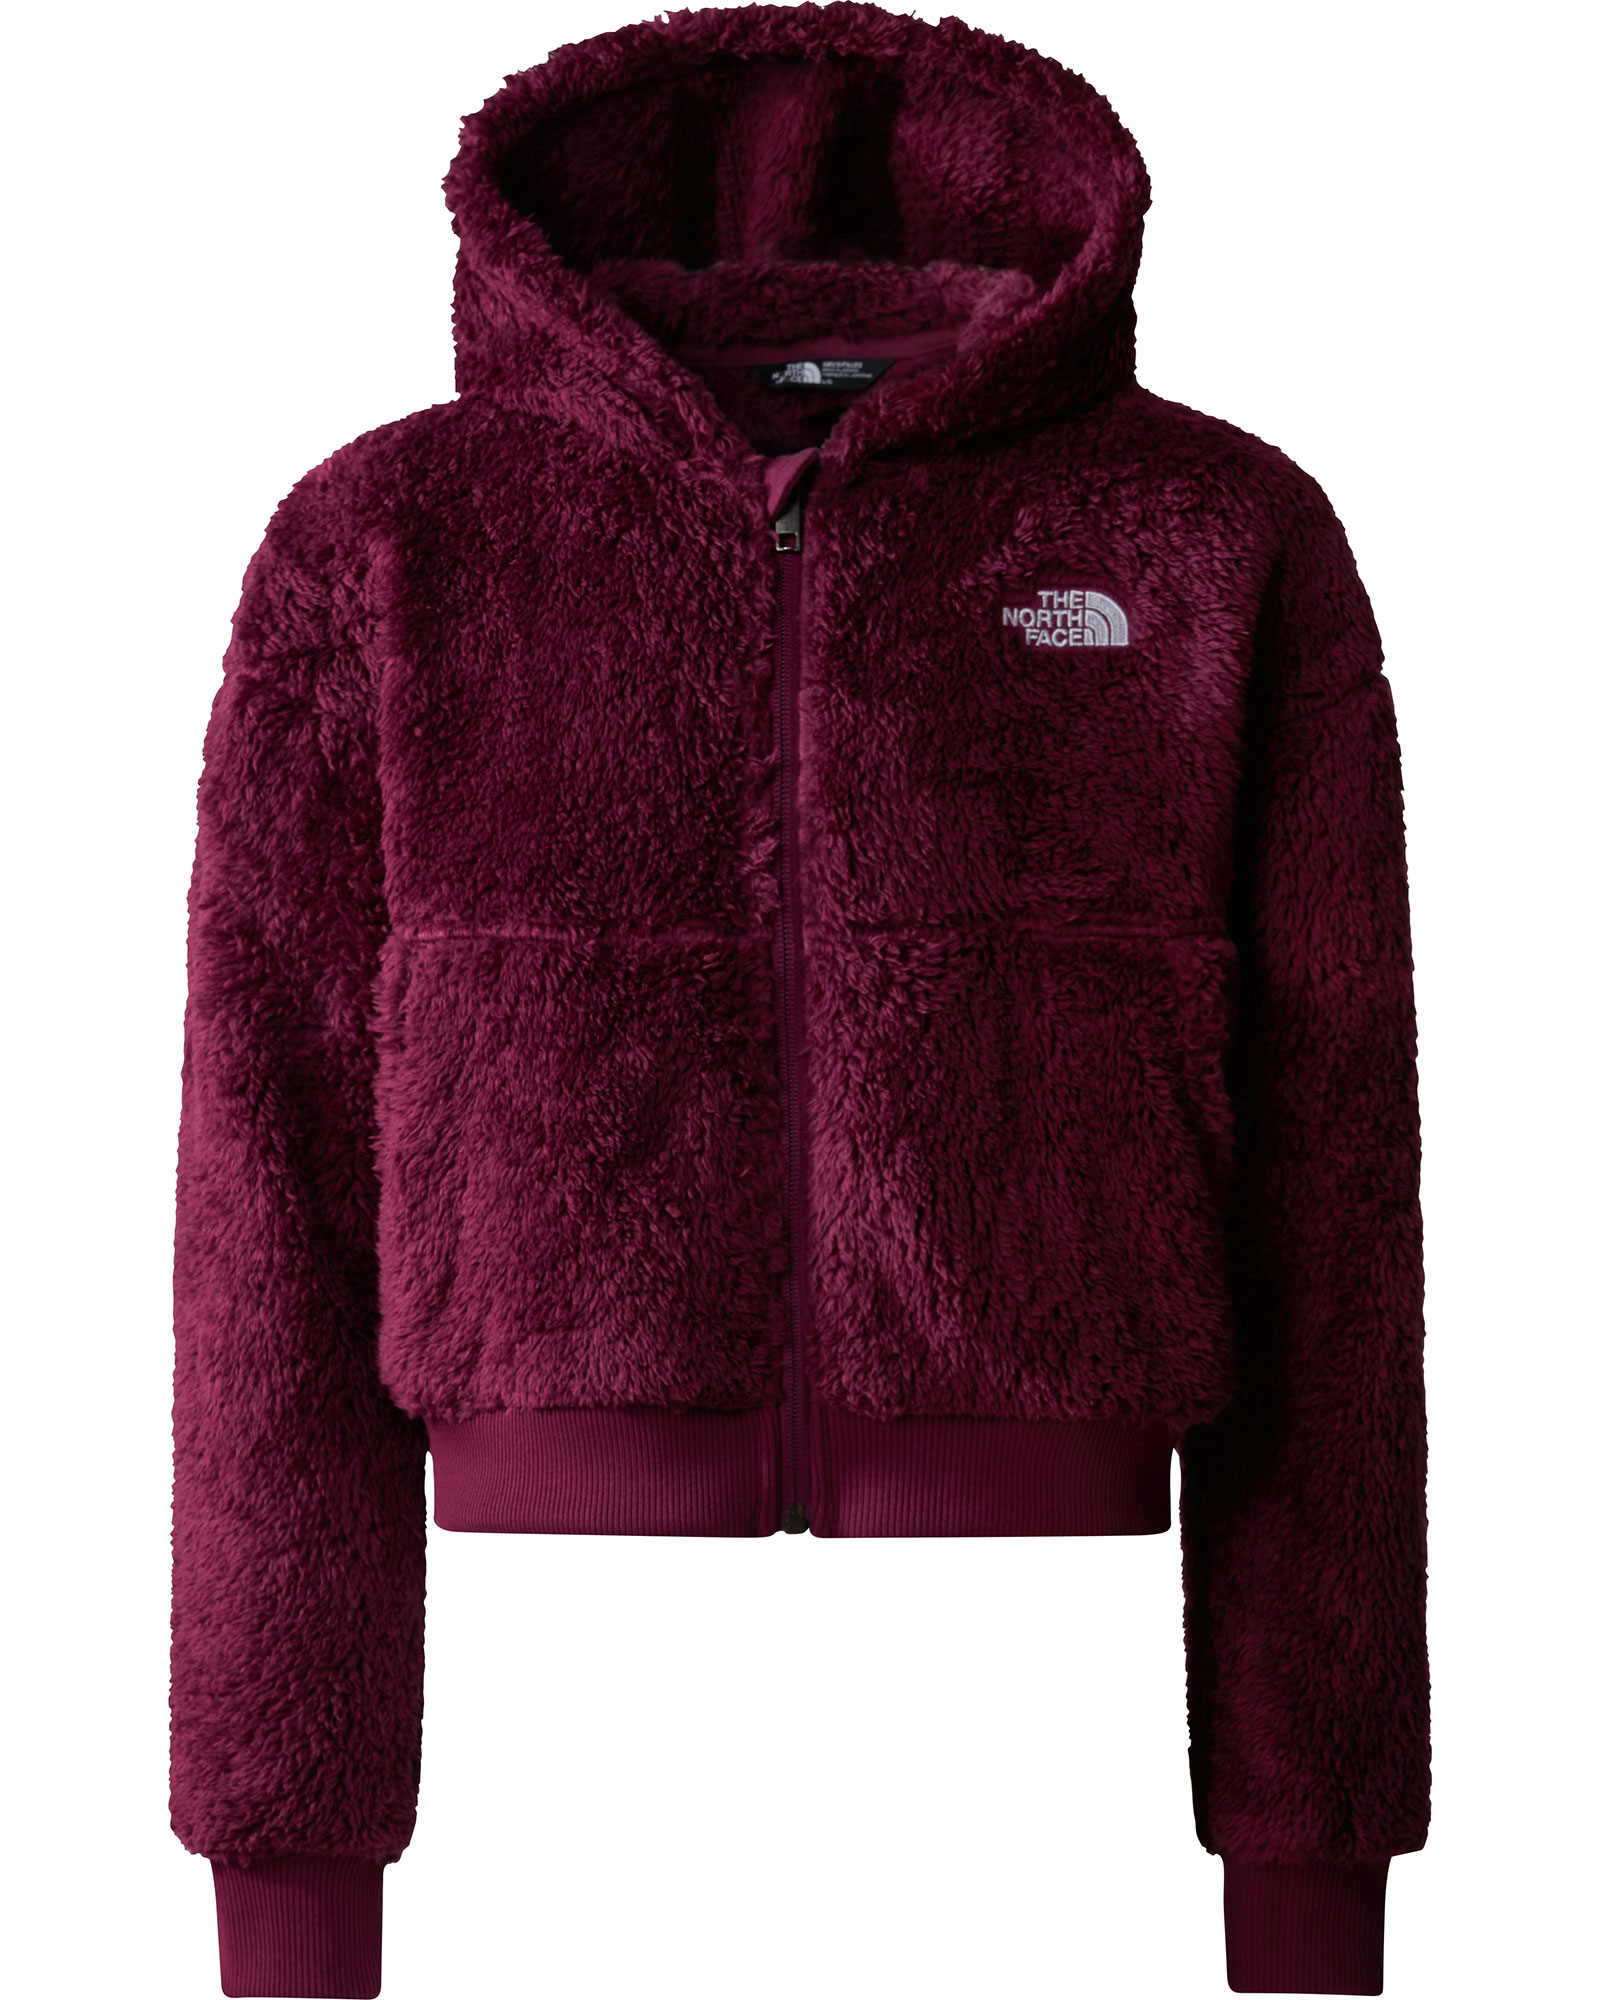 The North Face Girl’s Suave Oso FZ Hooded Jacket - Boysenberry S